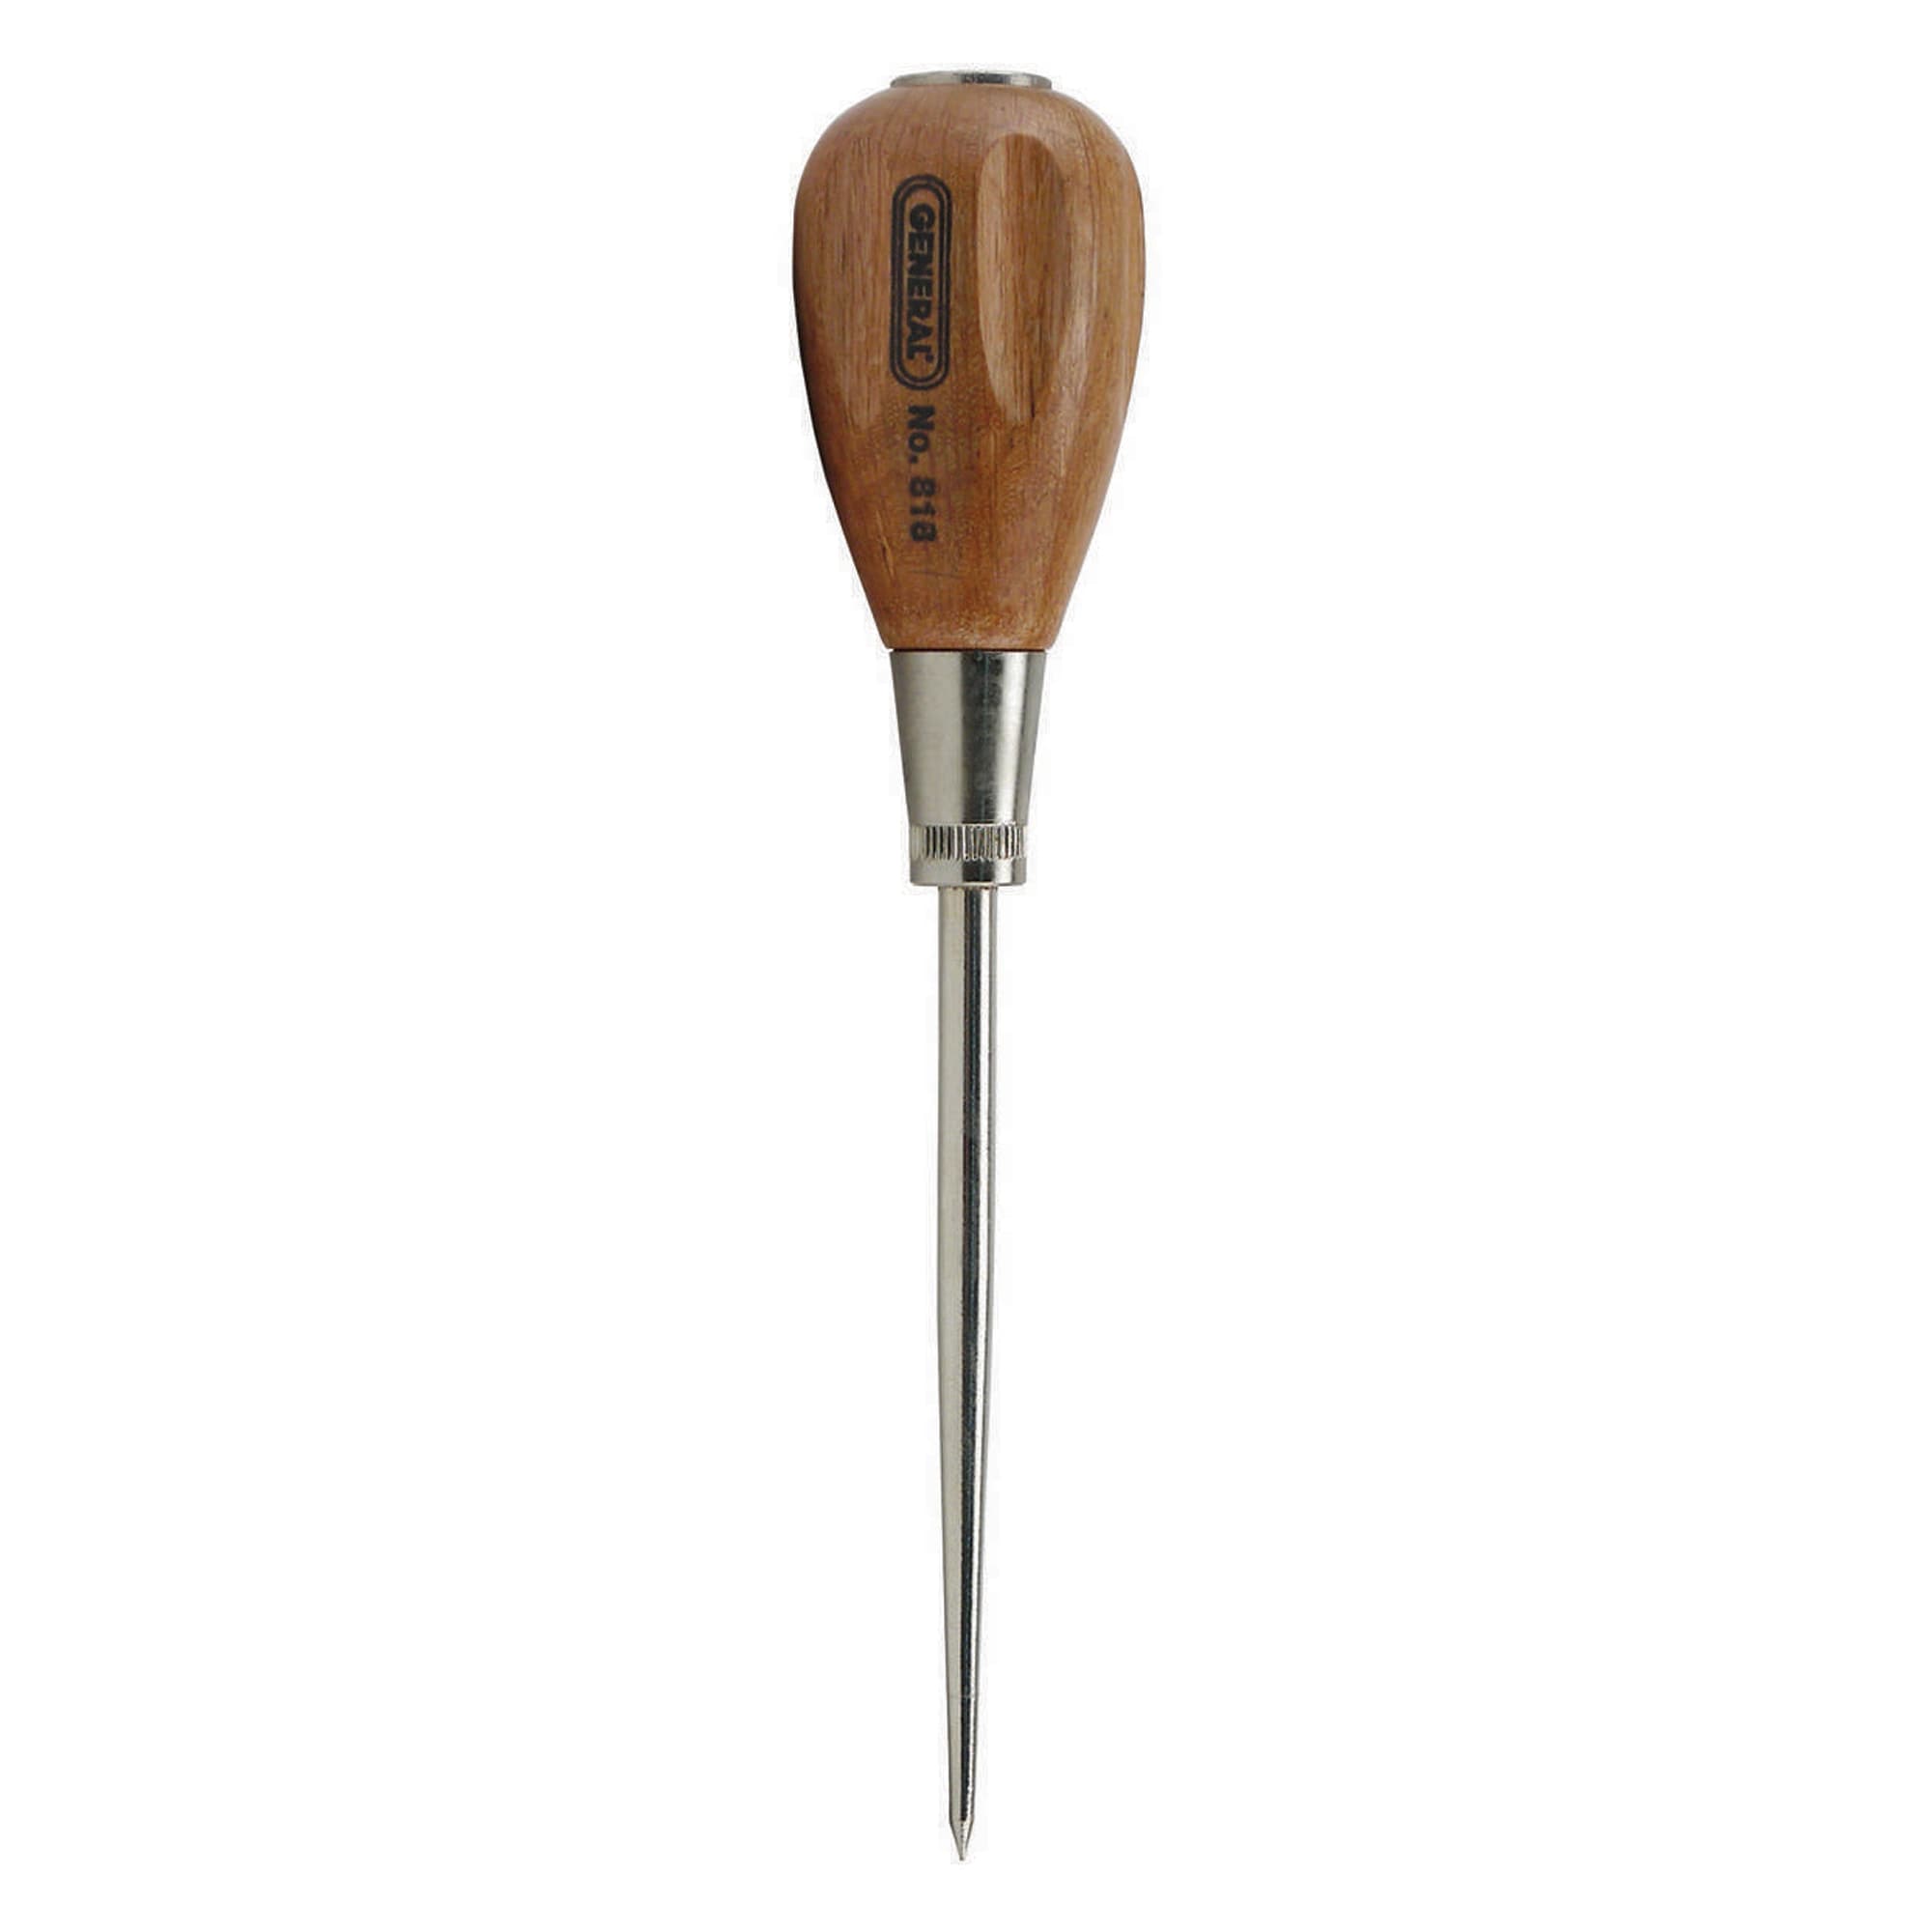 General Tools & Instruments General Tools Awl Punch - Round Steel Punch  with Wood Handle - 1.25-in Size - Stainless Steel Finish - Durable and  Comfortable Grip in the Punches department at